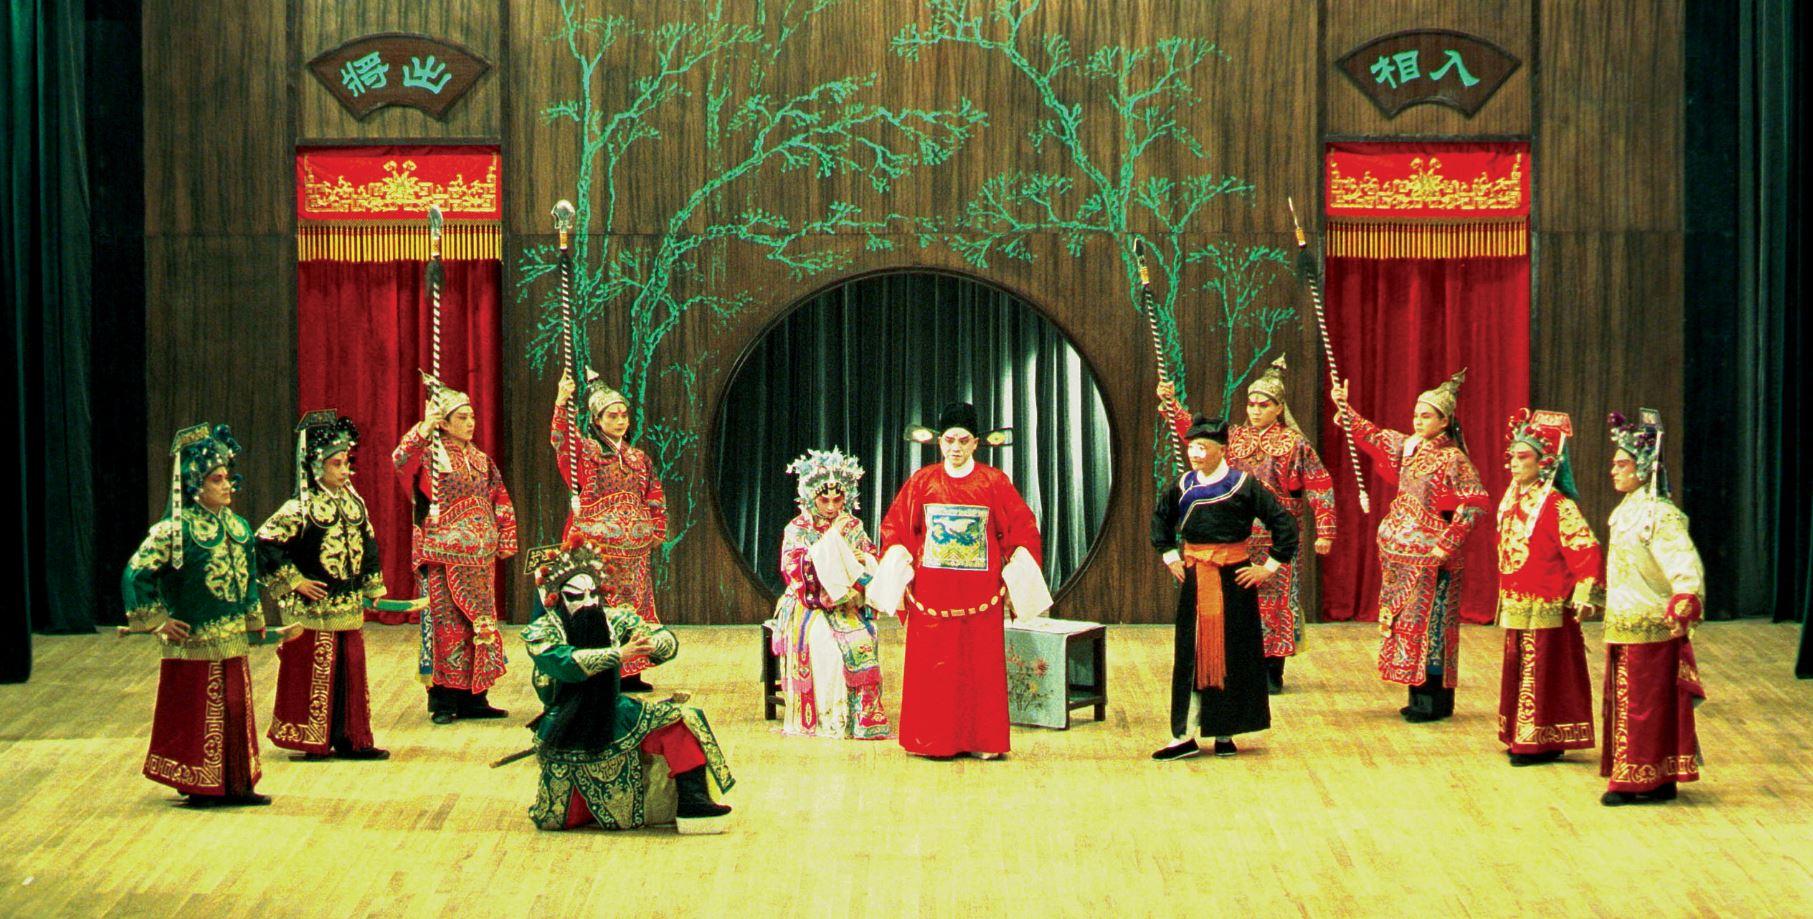 In support of World Day for Audiovisual Heritage, the Hong Kong Film Archive (HKFA) of the Leisure and Cultural Services Department will roll out a special screening programme to premiere the restored Kunqu opera films "Breaking the Willow" (2003) and "Peony Pavilion" (2001) on October 27 and November 5 at the HKFA Cinema and the Grand Theatre of the Hong Kong Cultural Centre respectively. Photo shows a film still of "Breaking the Willow".